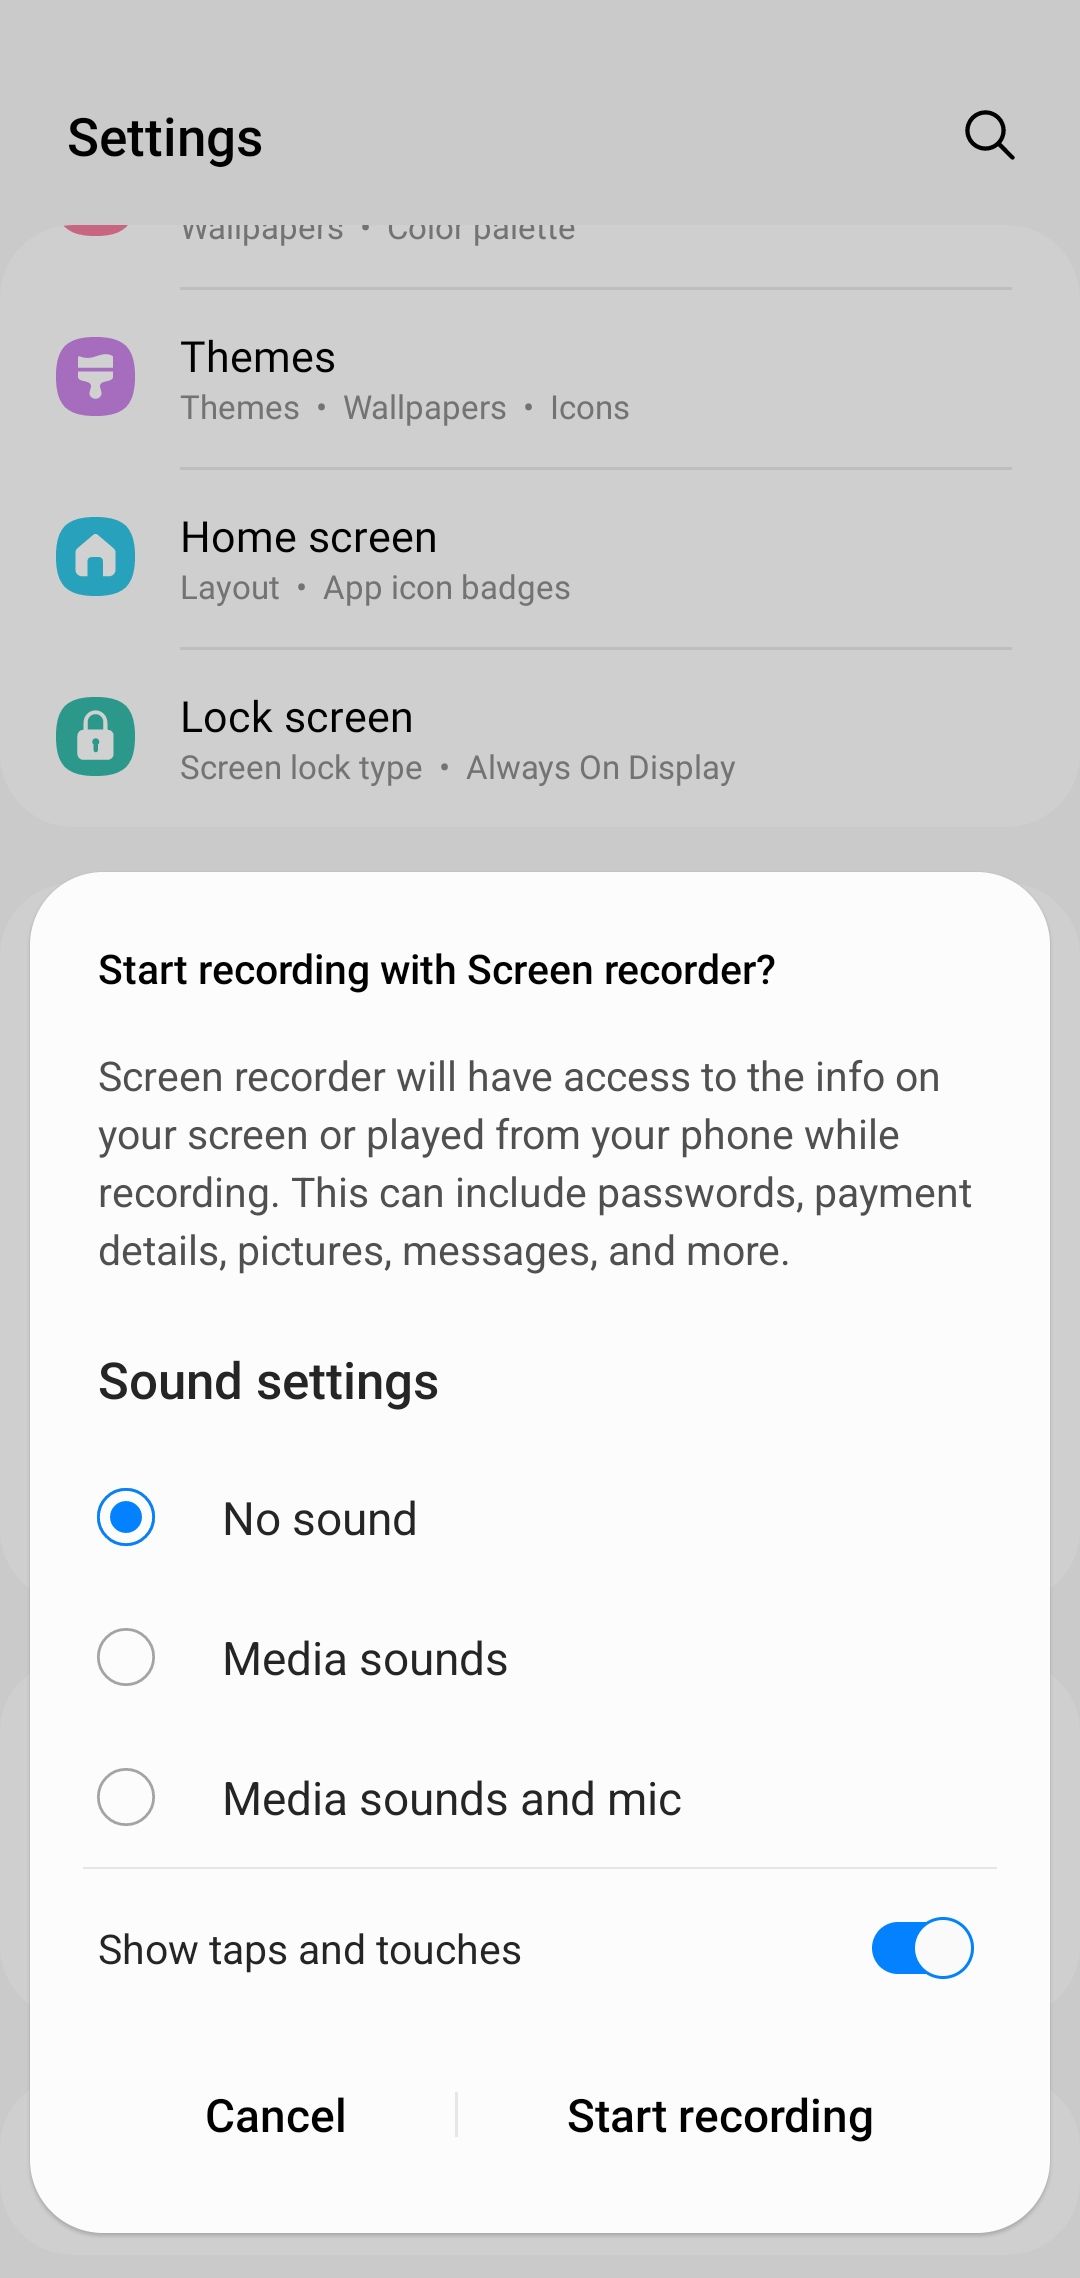 Screen Recording Fails on Samsung S21 (Android 12) - Samsung Community